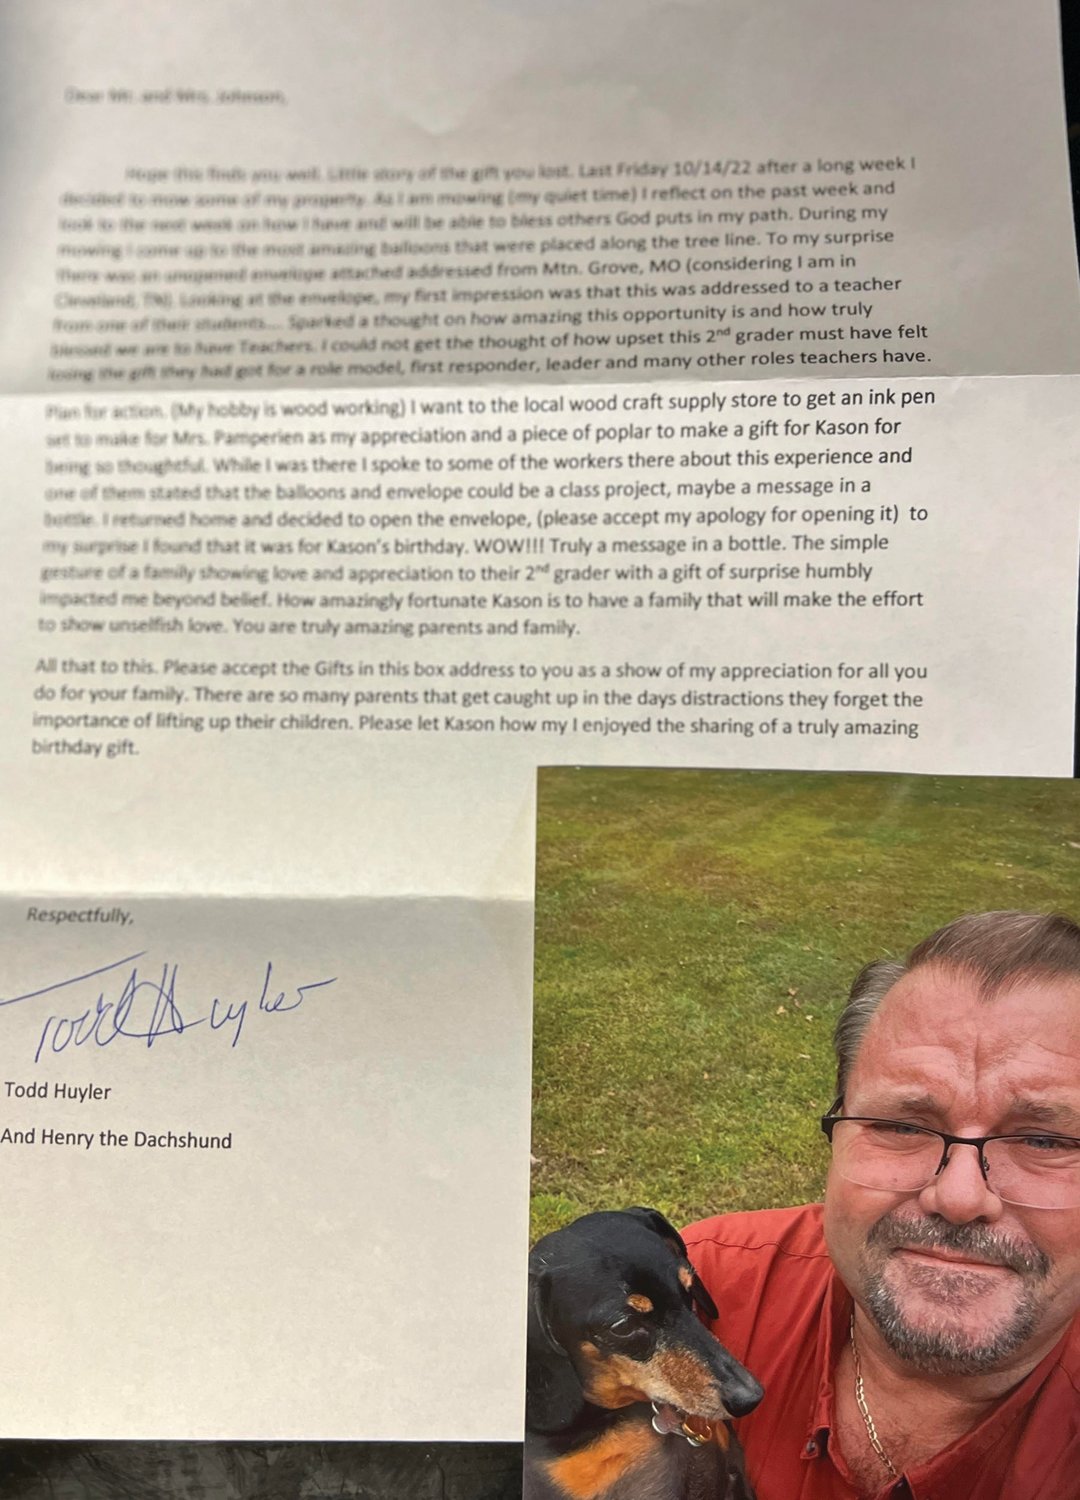 A letter and photo from Todd Huyler.